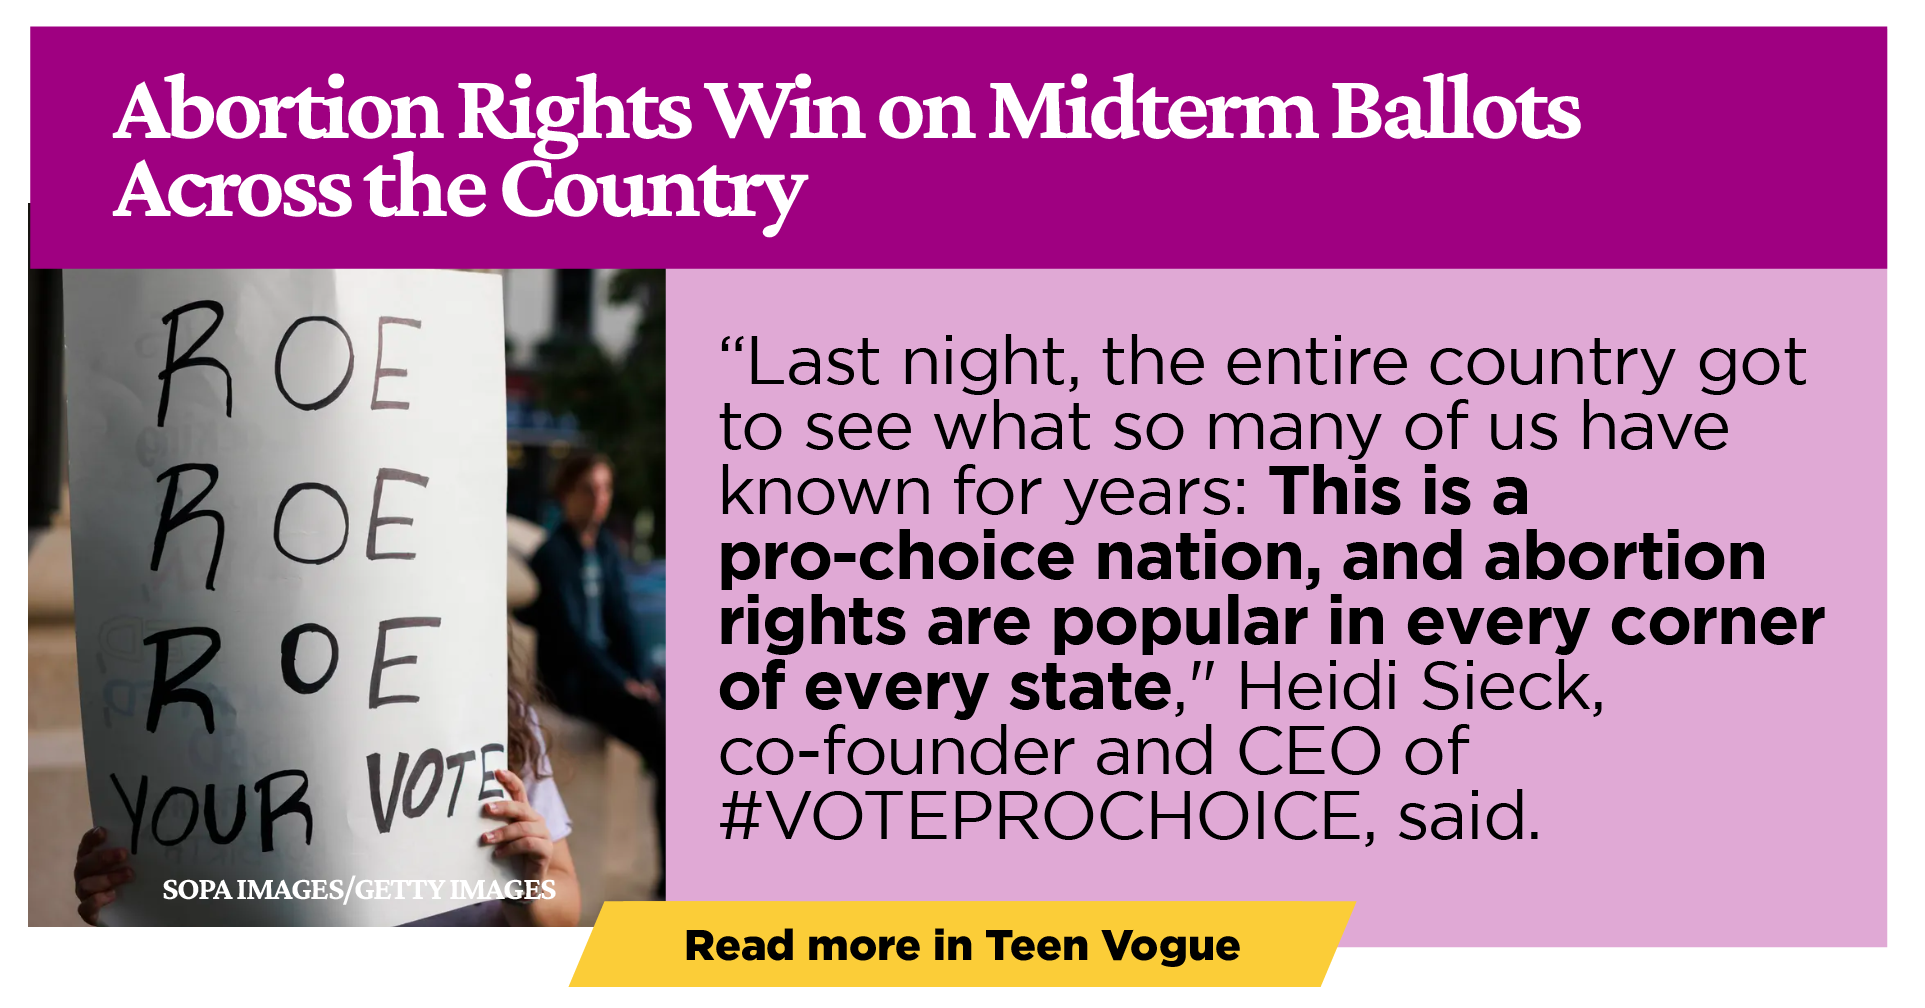 Abortion Rights Win on Midterm Ballots Across the Country: “Last night, the entire country got to see what so many of us have known for years: This is a pro-choice nation, and abortion rights are popular in every corner of every state," Heidi Sieck, co-founder and CEO of #VOTEPROCHOICE, said.